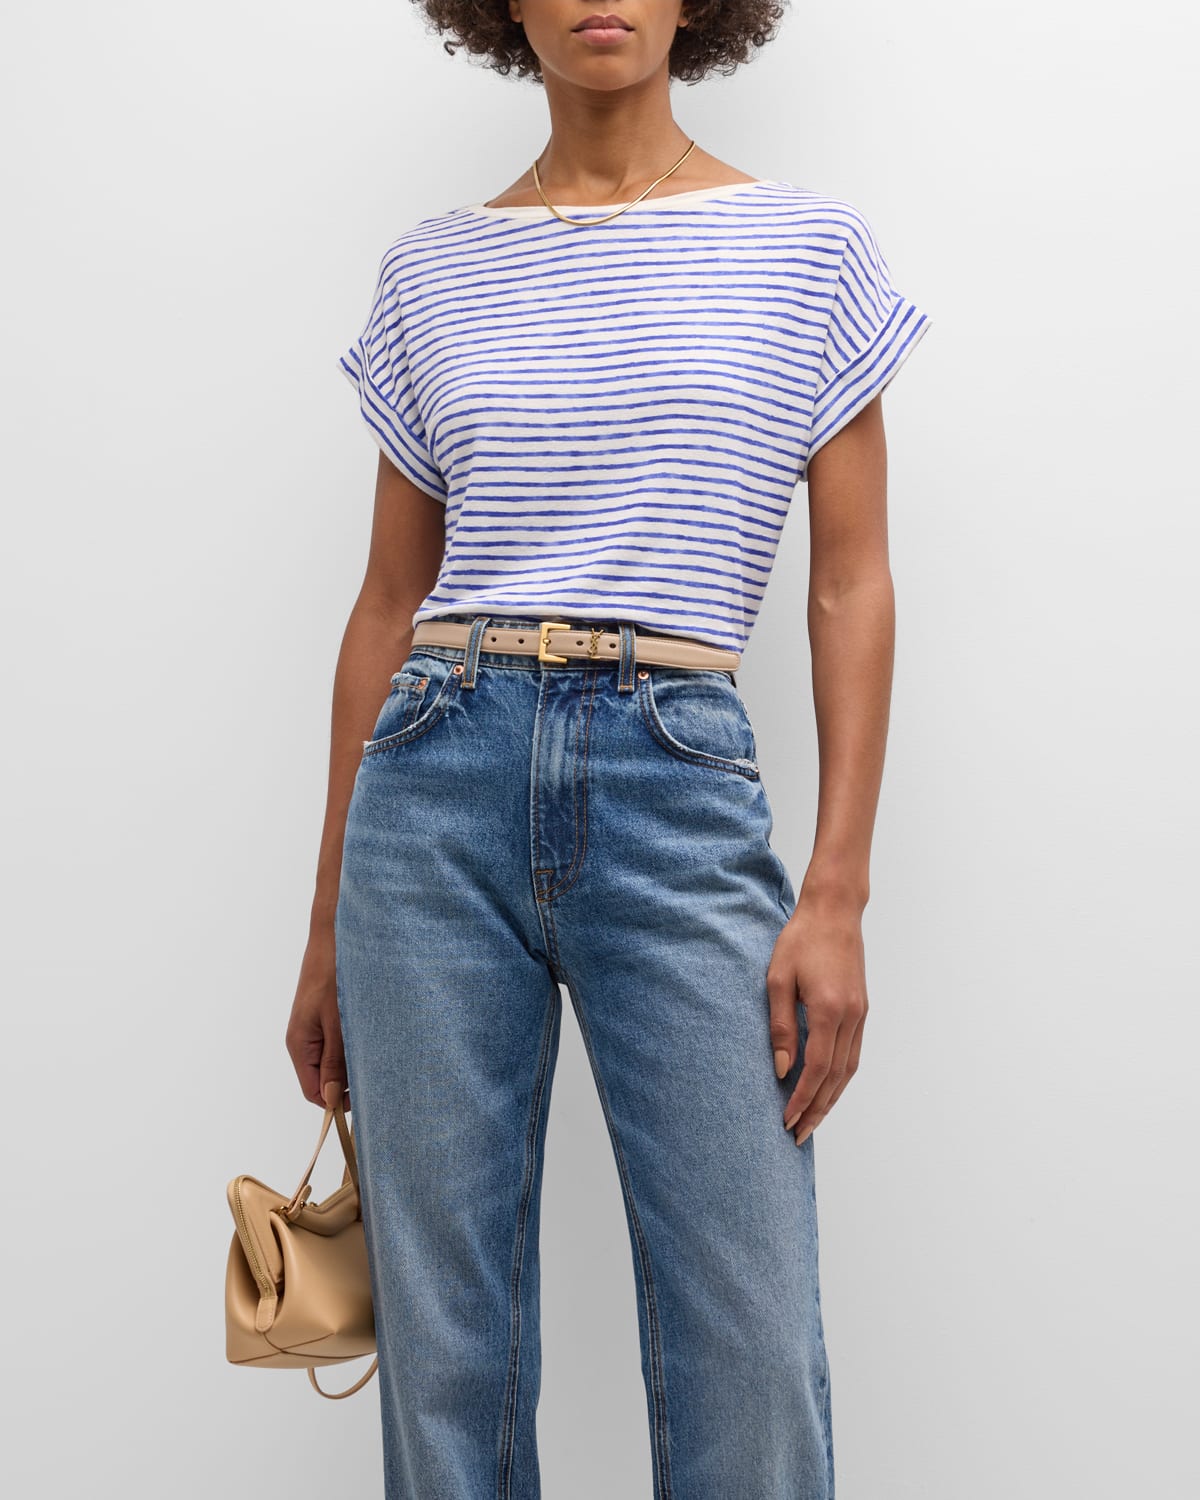 Striped Stretch Linen Tee